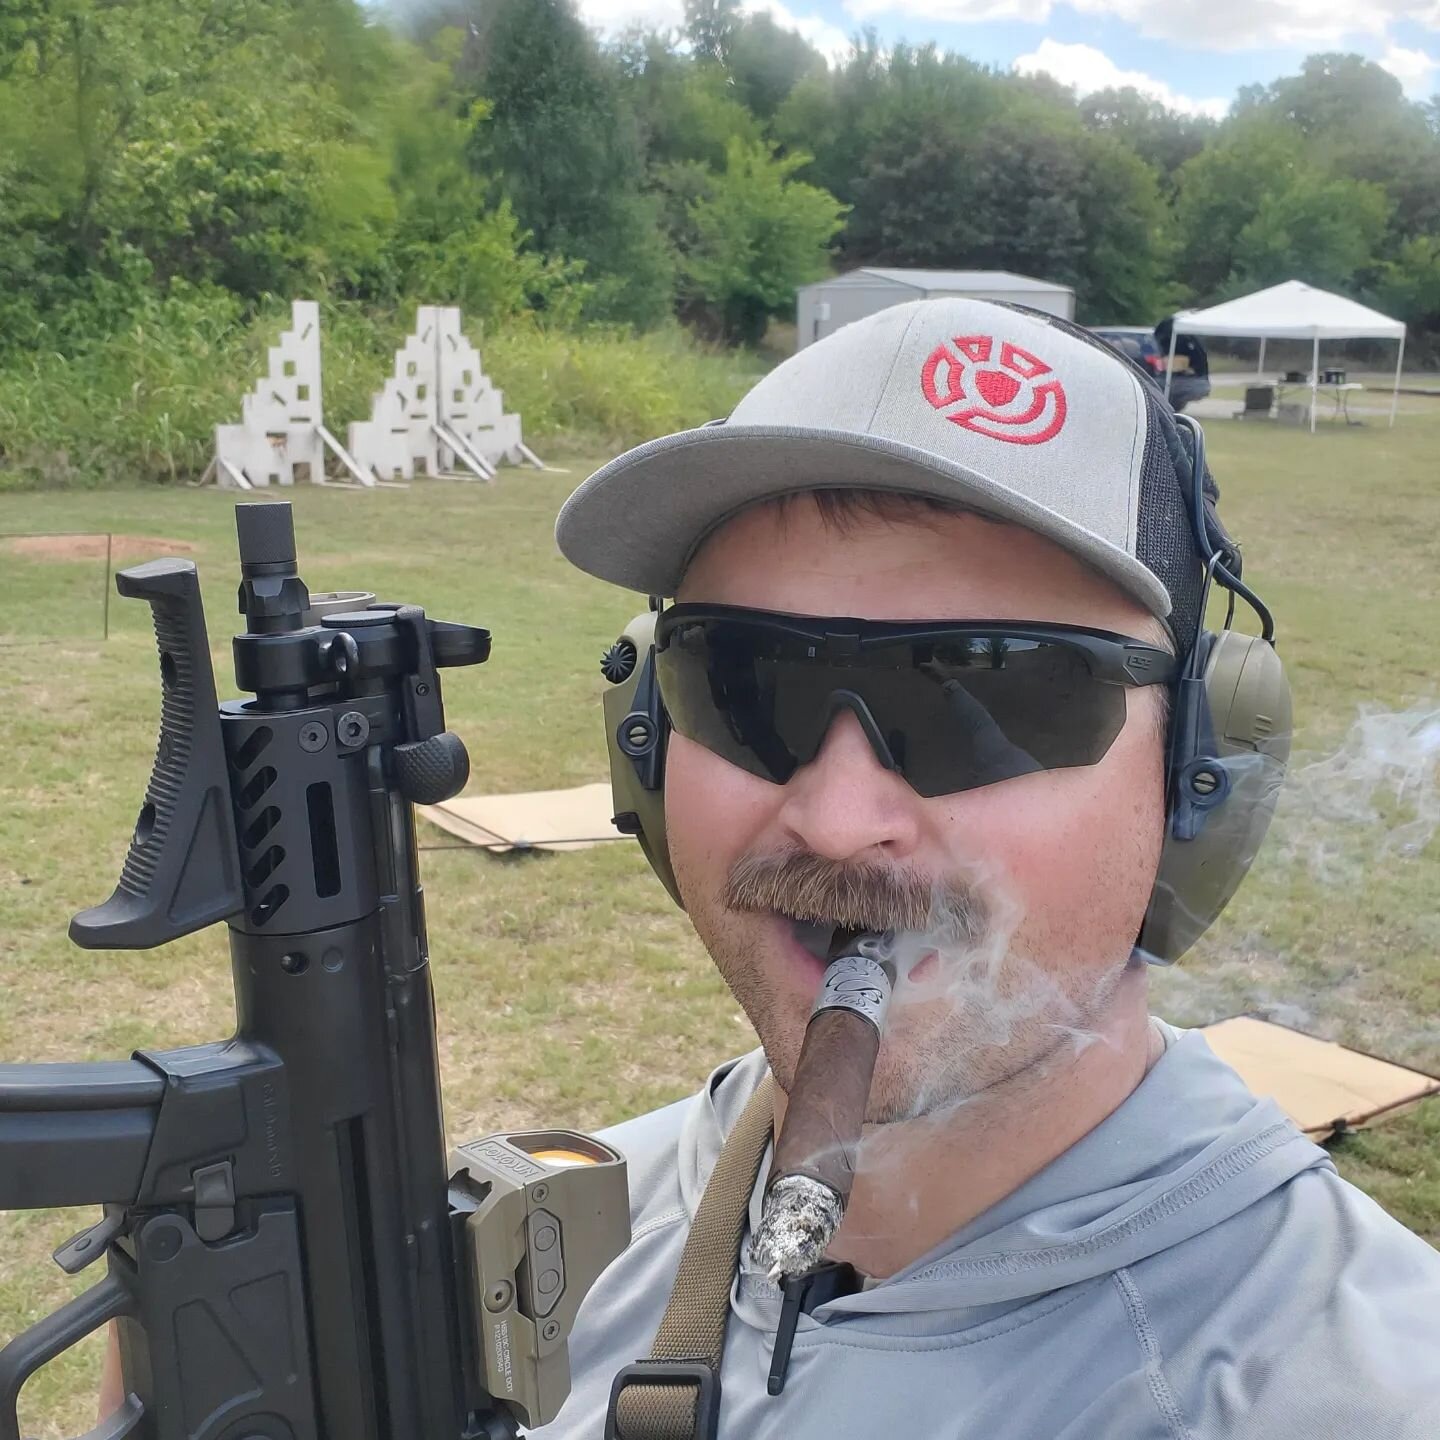 I've had worse days! Decent cigar while I put a few rounds through my new MP5 clone.
#rangeday #traintolive #gds